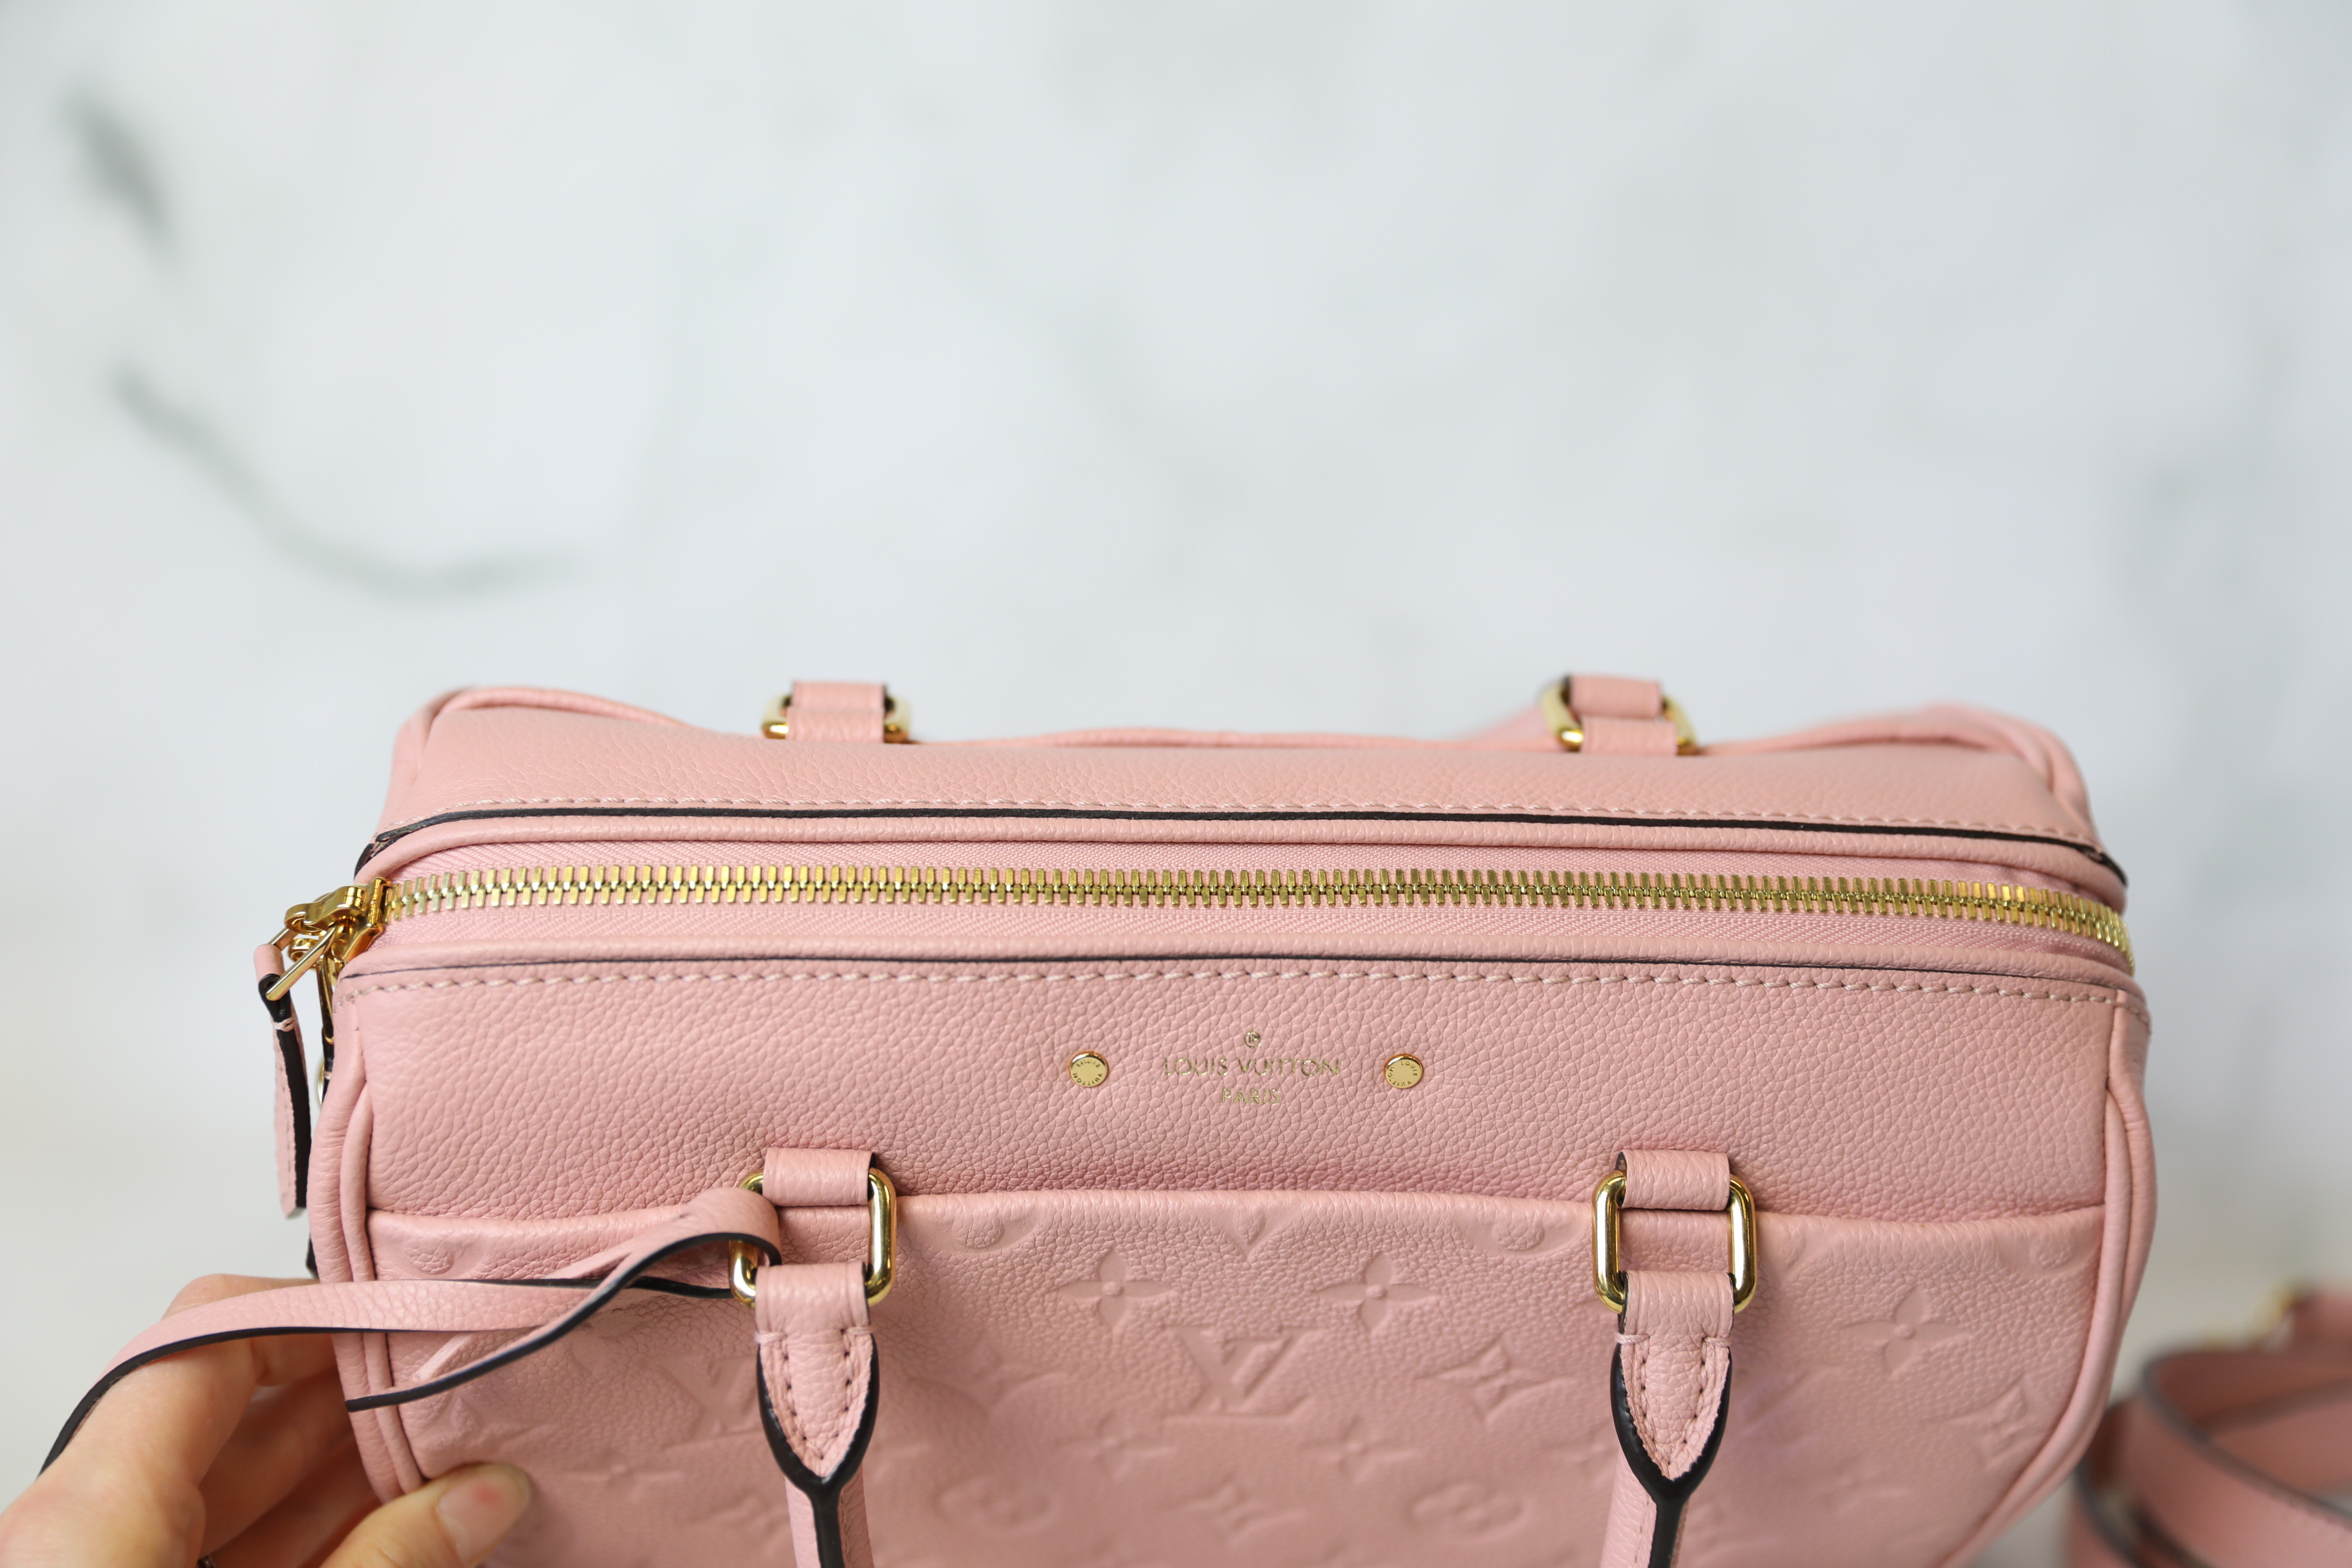 NEW Louis Vuitton Speedy B in Rose Poudre, Chatty Bag Reveal + Mini Review